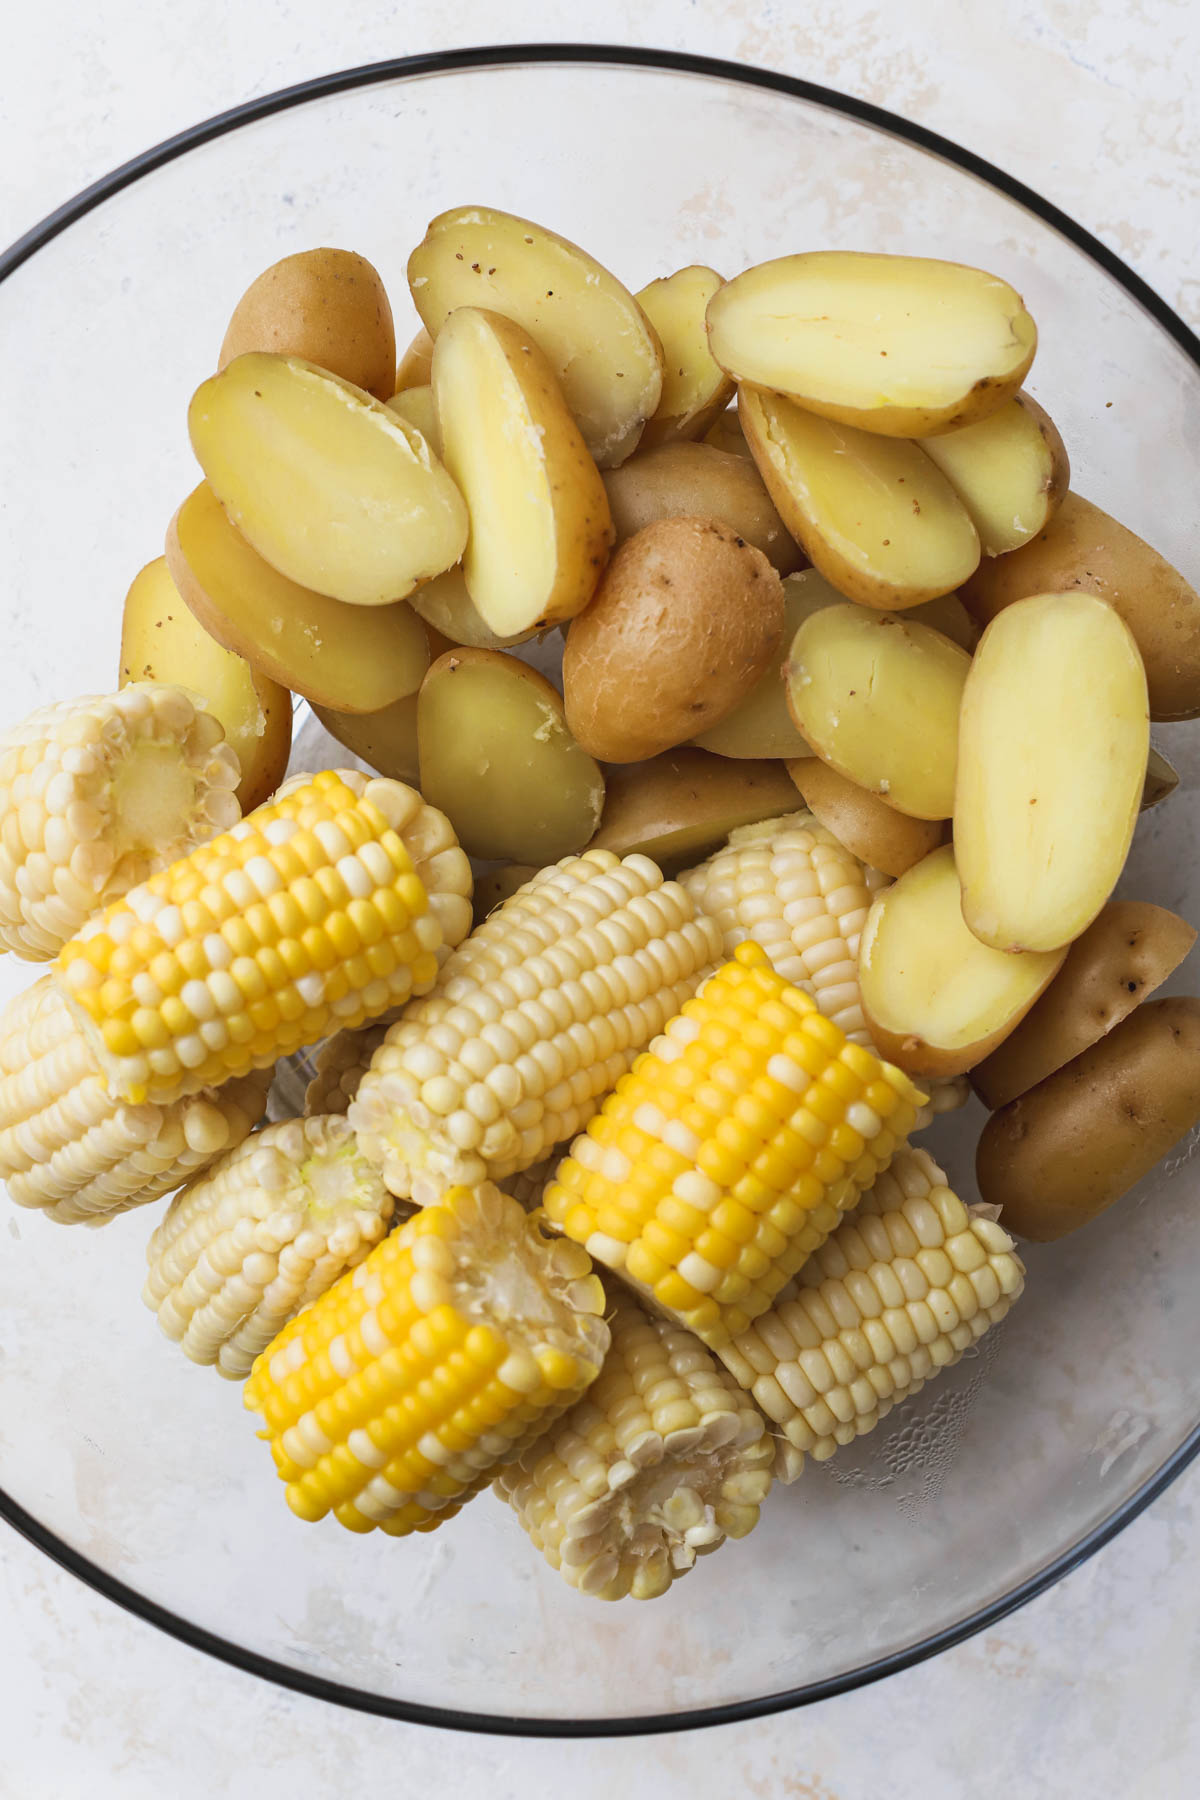 Boiled potatoes and corn on the cob. 